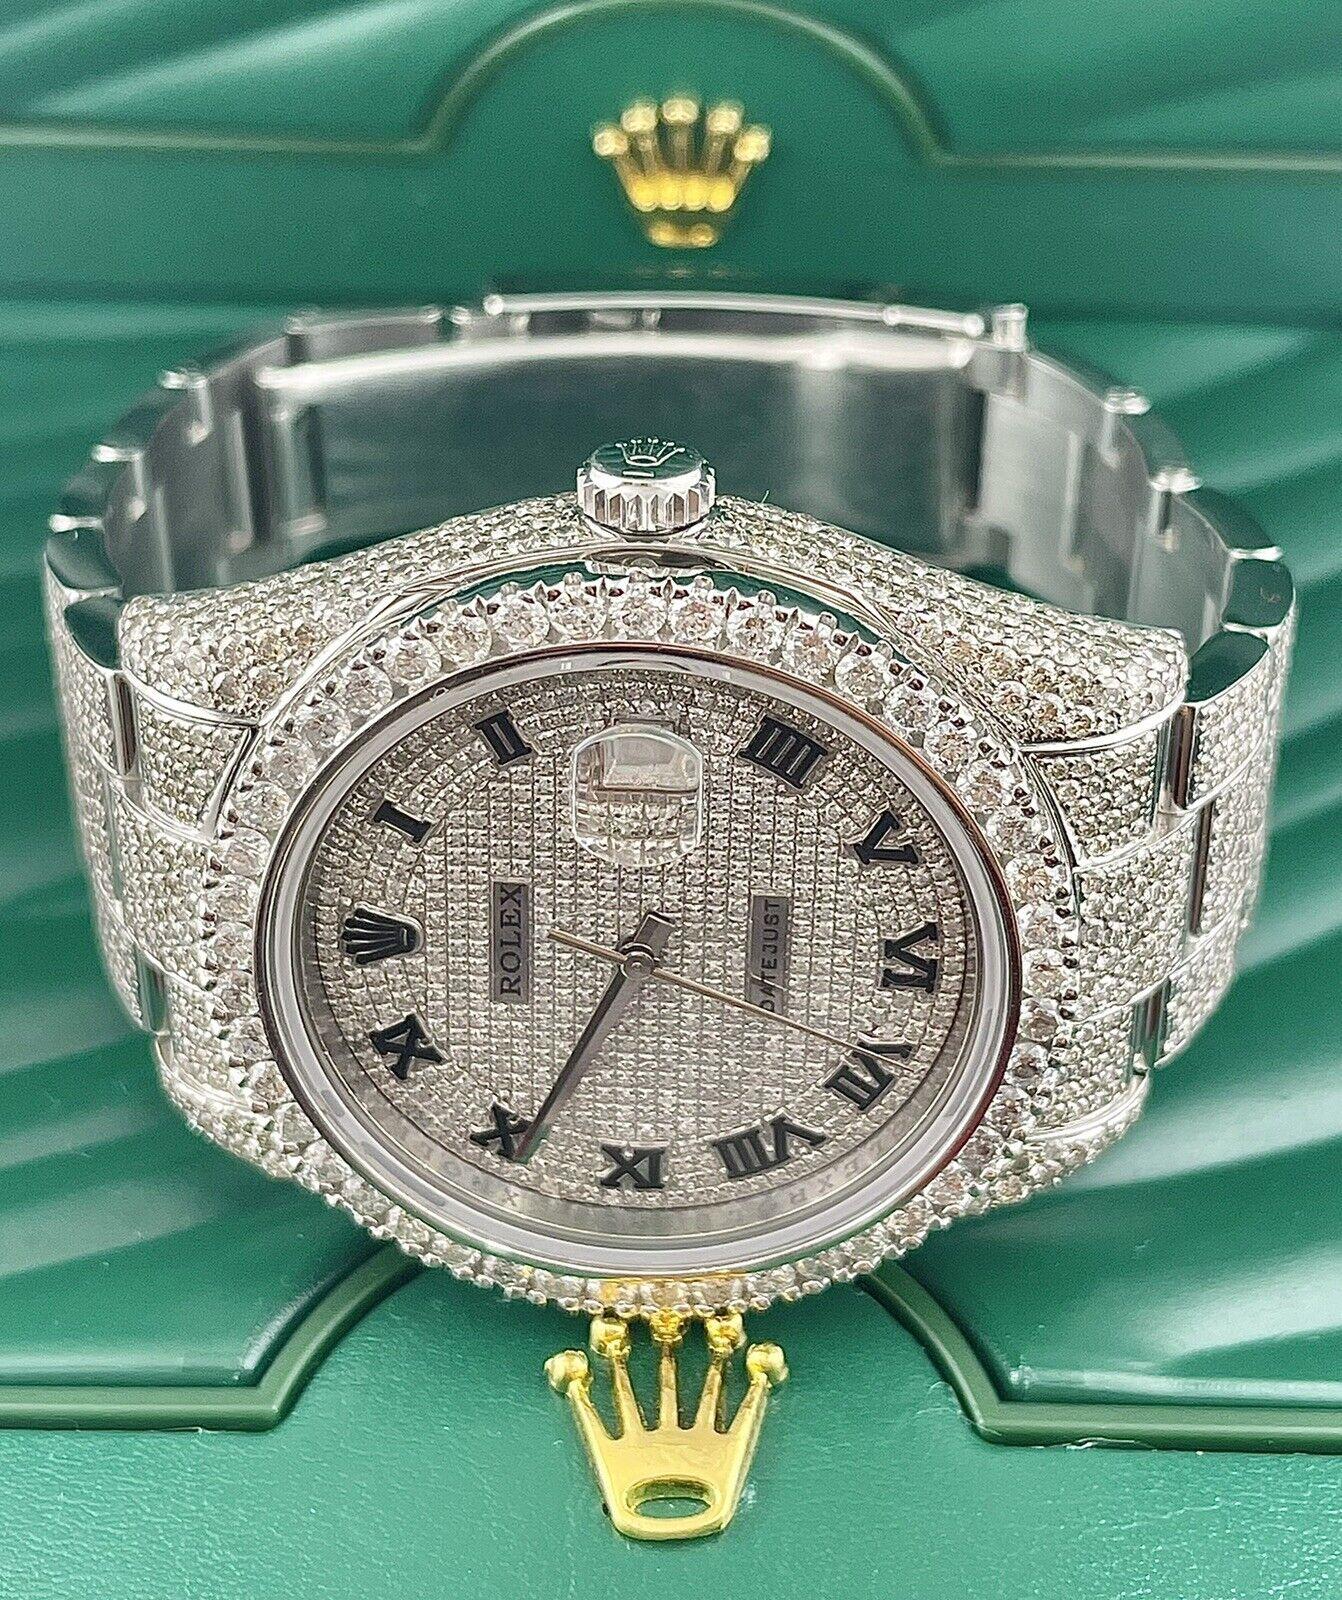 Taille ronde Rolex Homme Datejust II Oyster 41mm Iced Out 20ct Genuine Diamonds Ref:116300 en vente